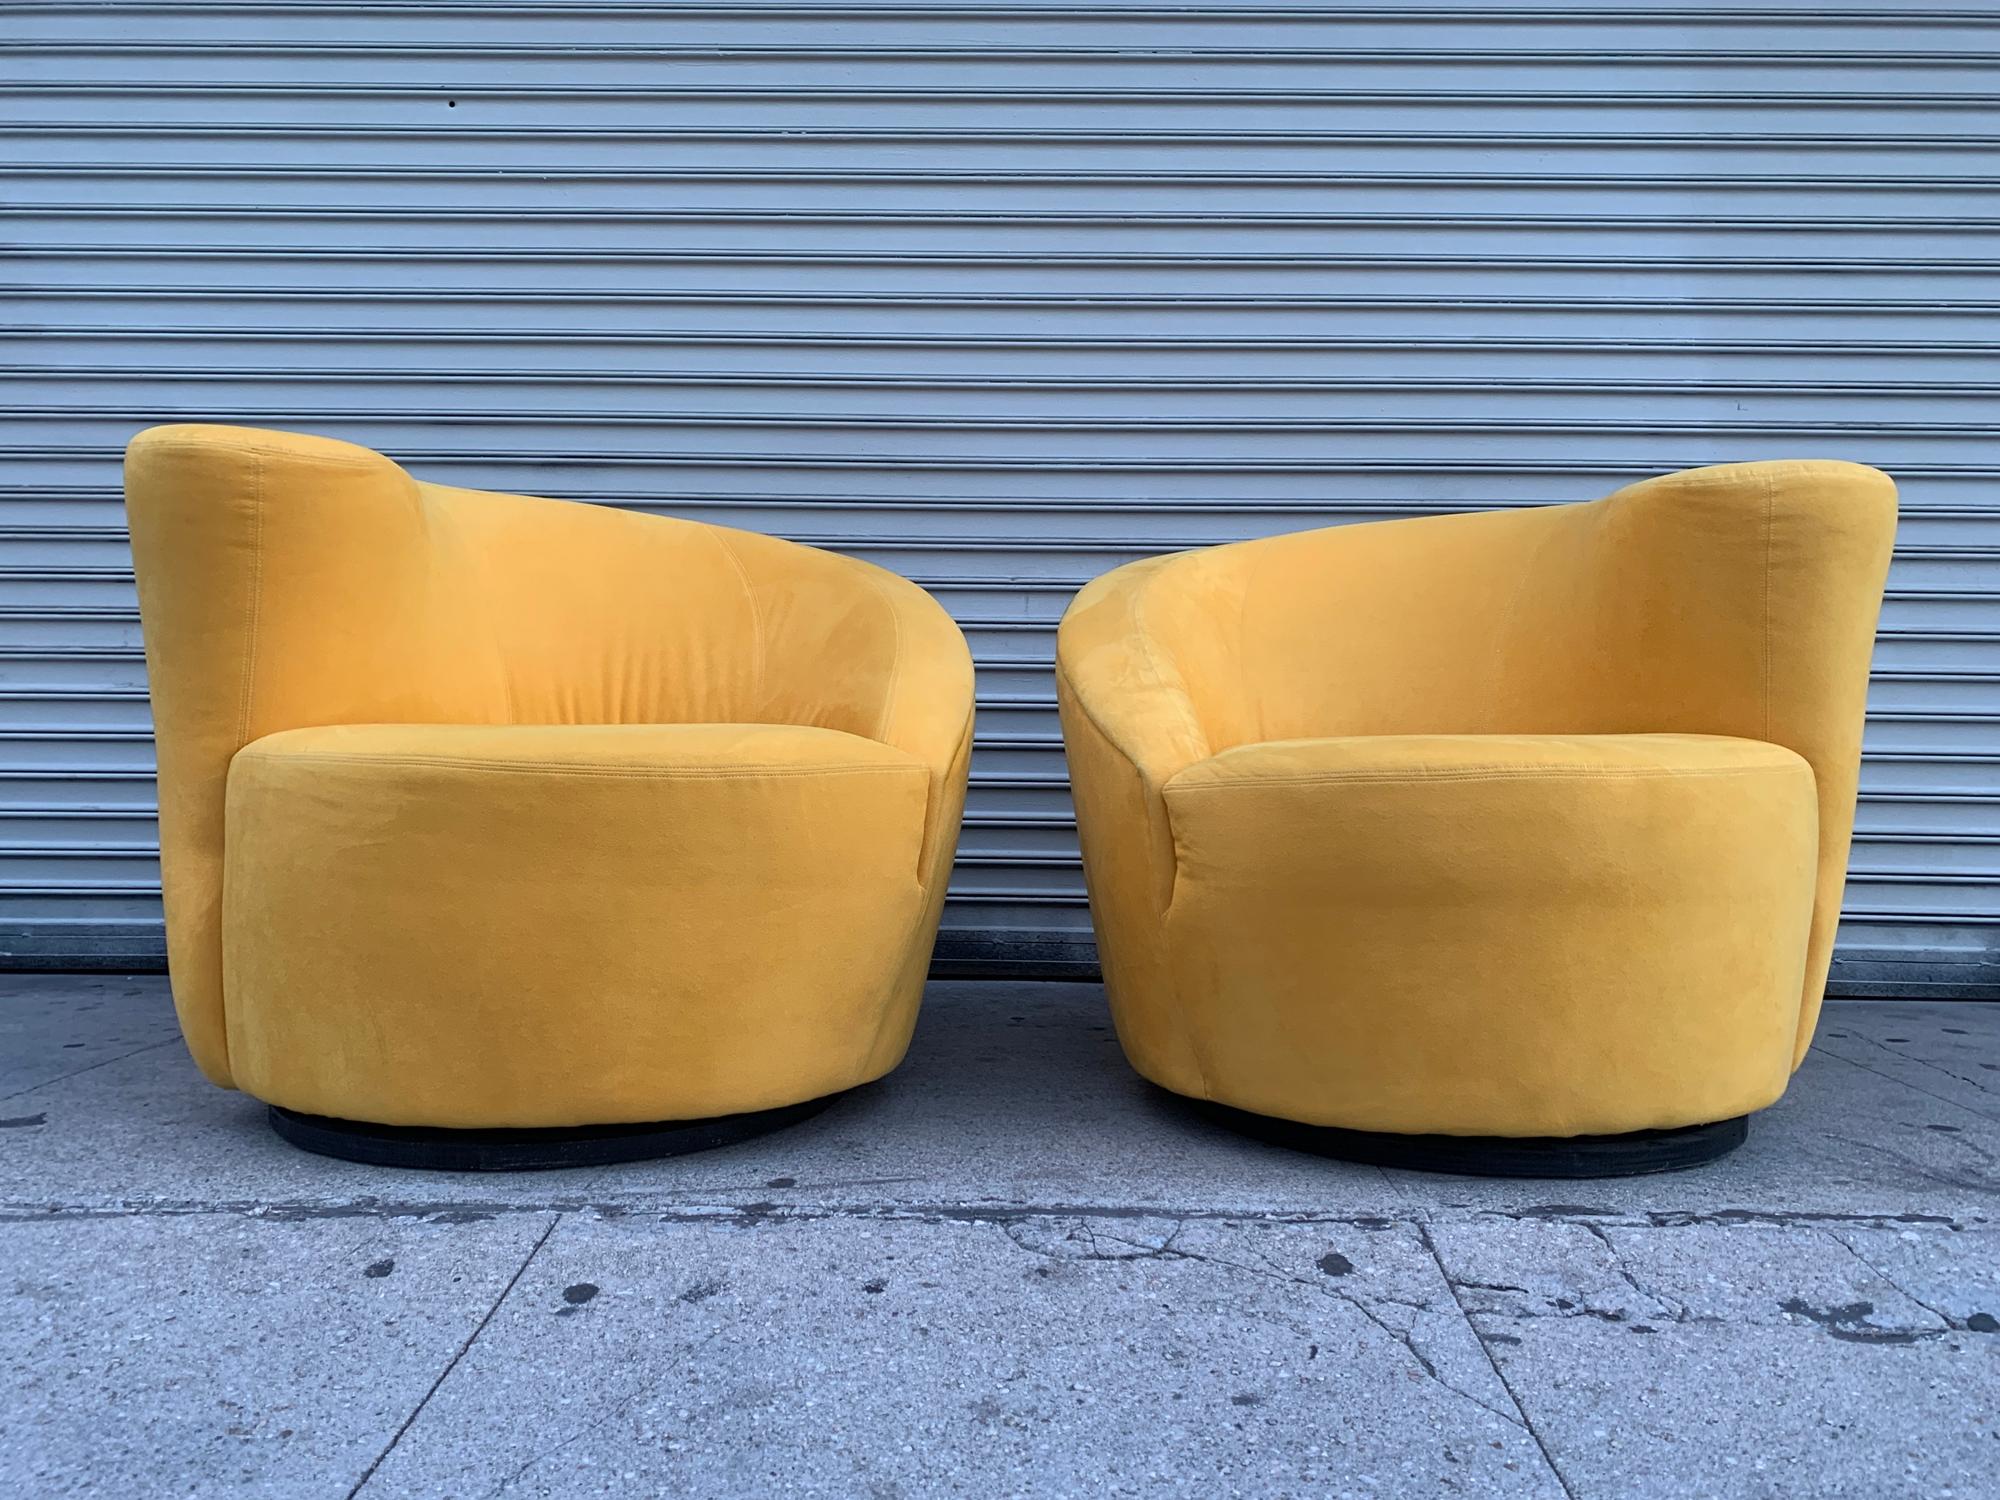 Vladimir Kagan designed Nautilus lounge chairs upholstered in a yellow microfiber fabric which matches the Vladimir Kagan Serpentine sofa we have listed (this was purchased as a set).
Both, the chairs and sofa are designed by Vladimir Kagan and